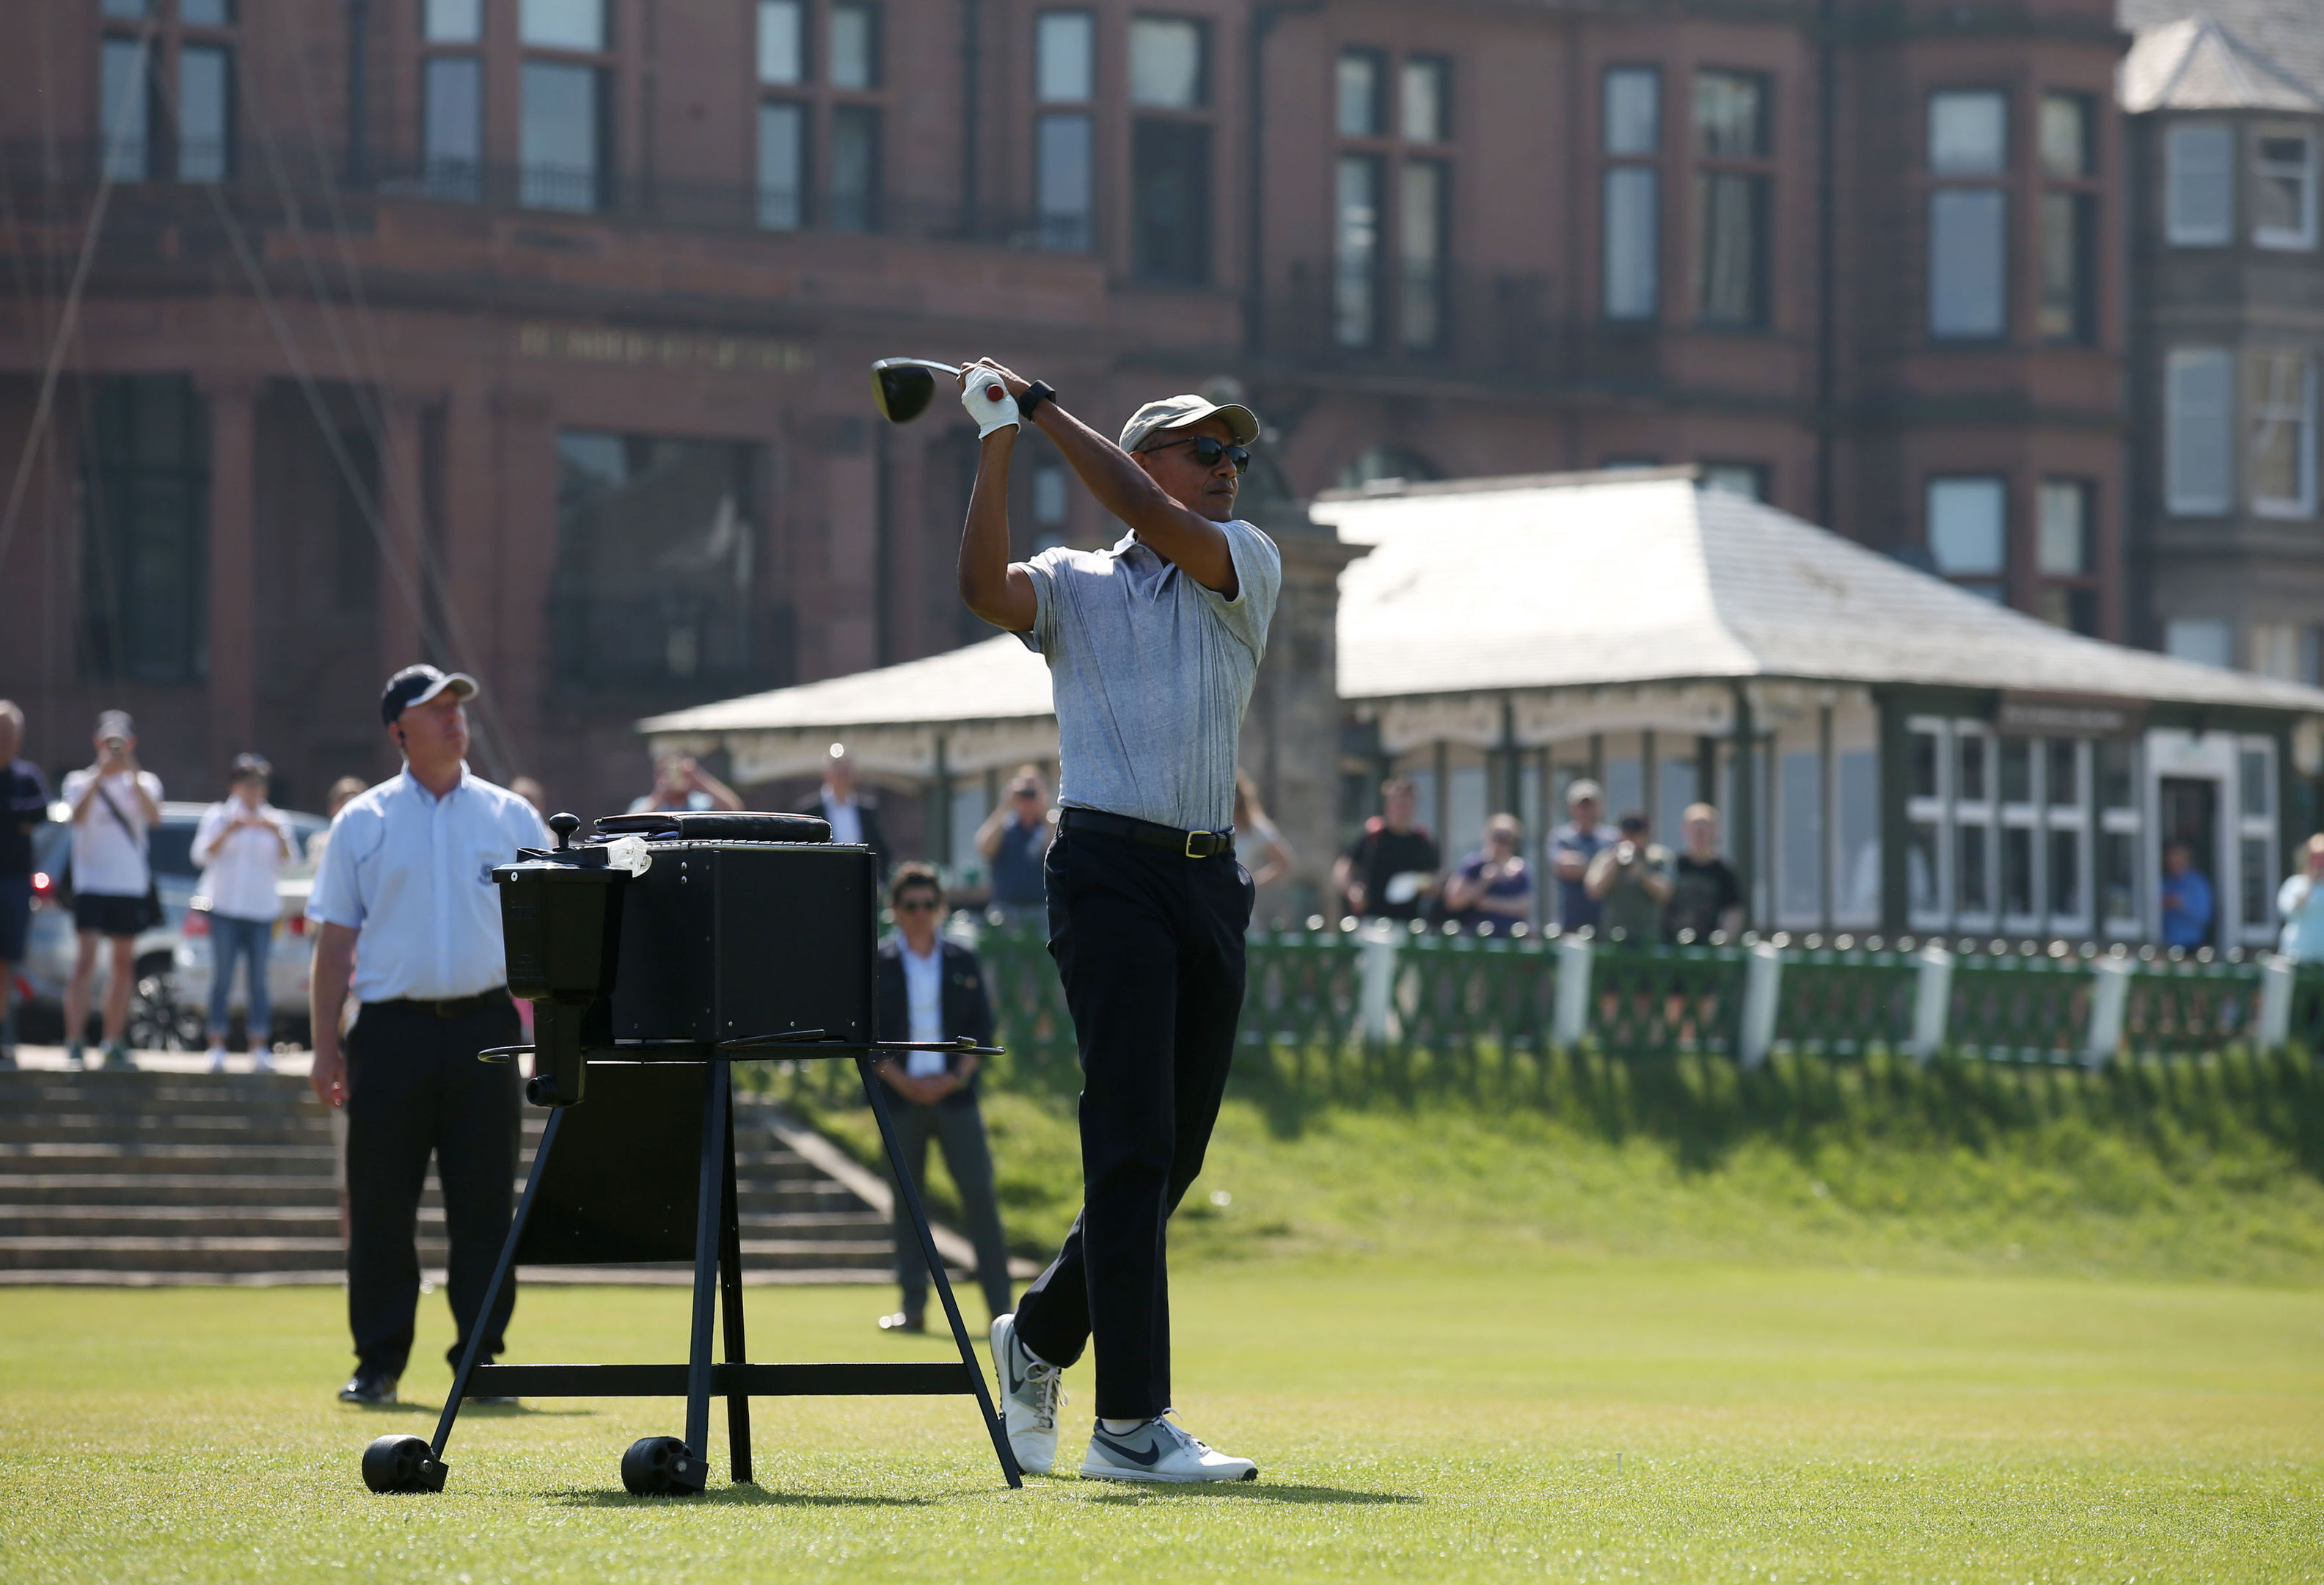 Barack Obama tees off at the first hole at St Andrews Golf Club (Andrew Milligan/PA Wire)